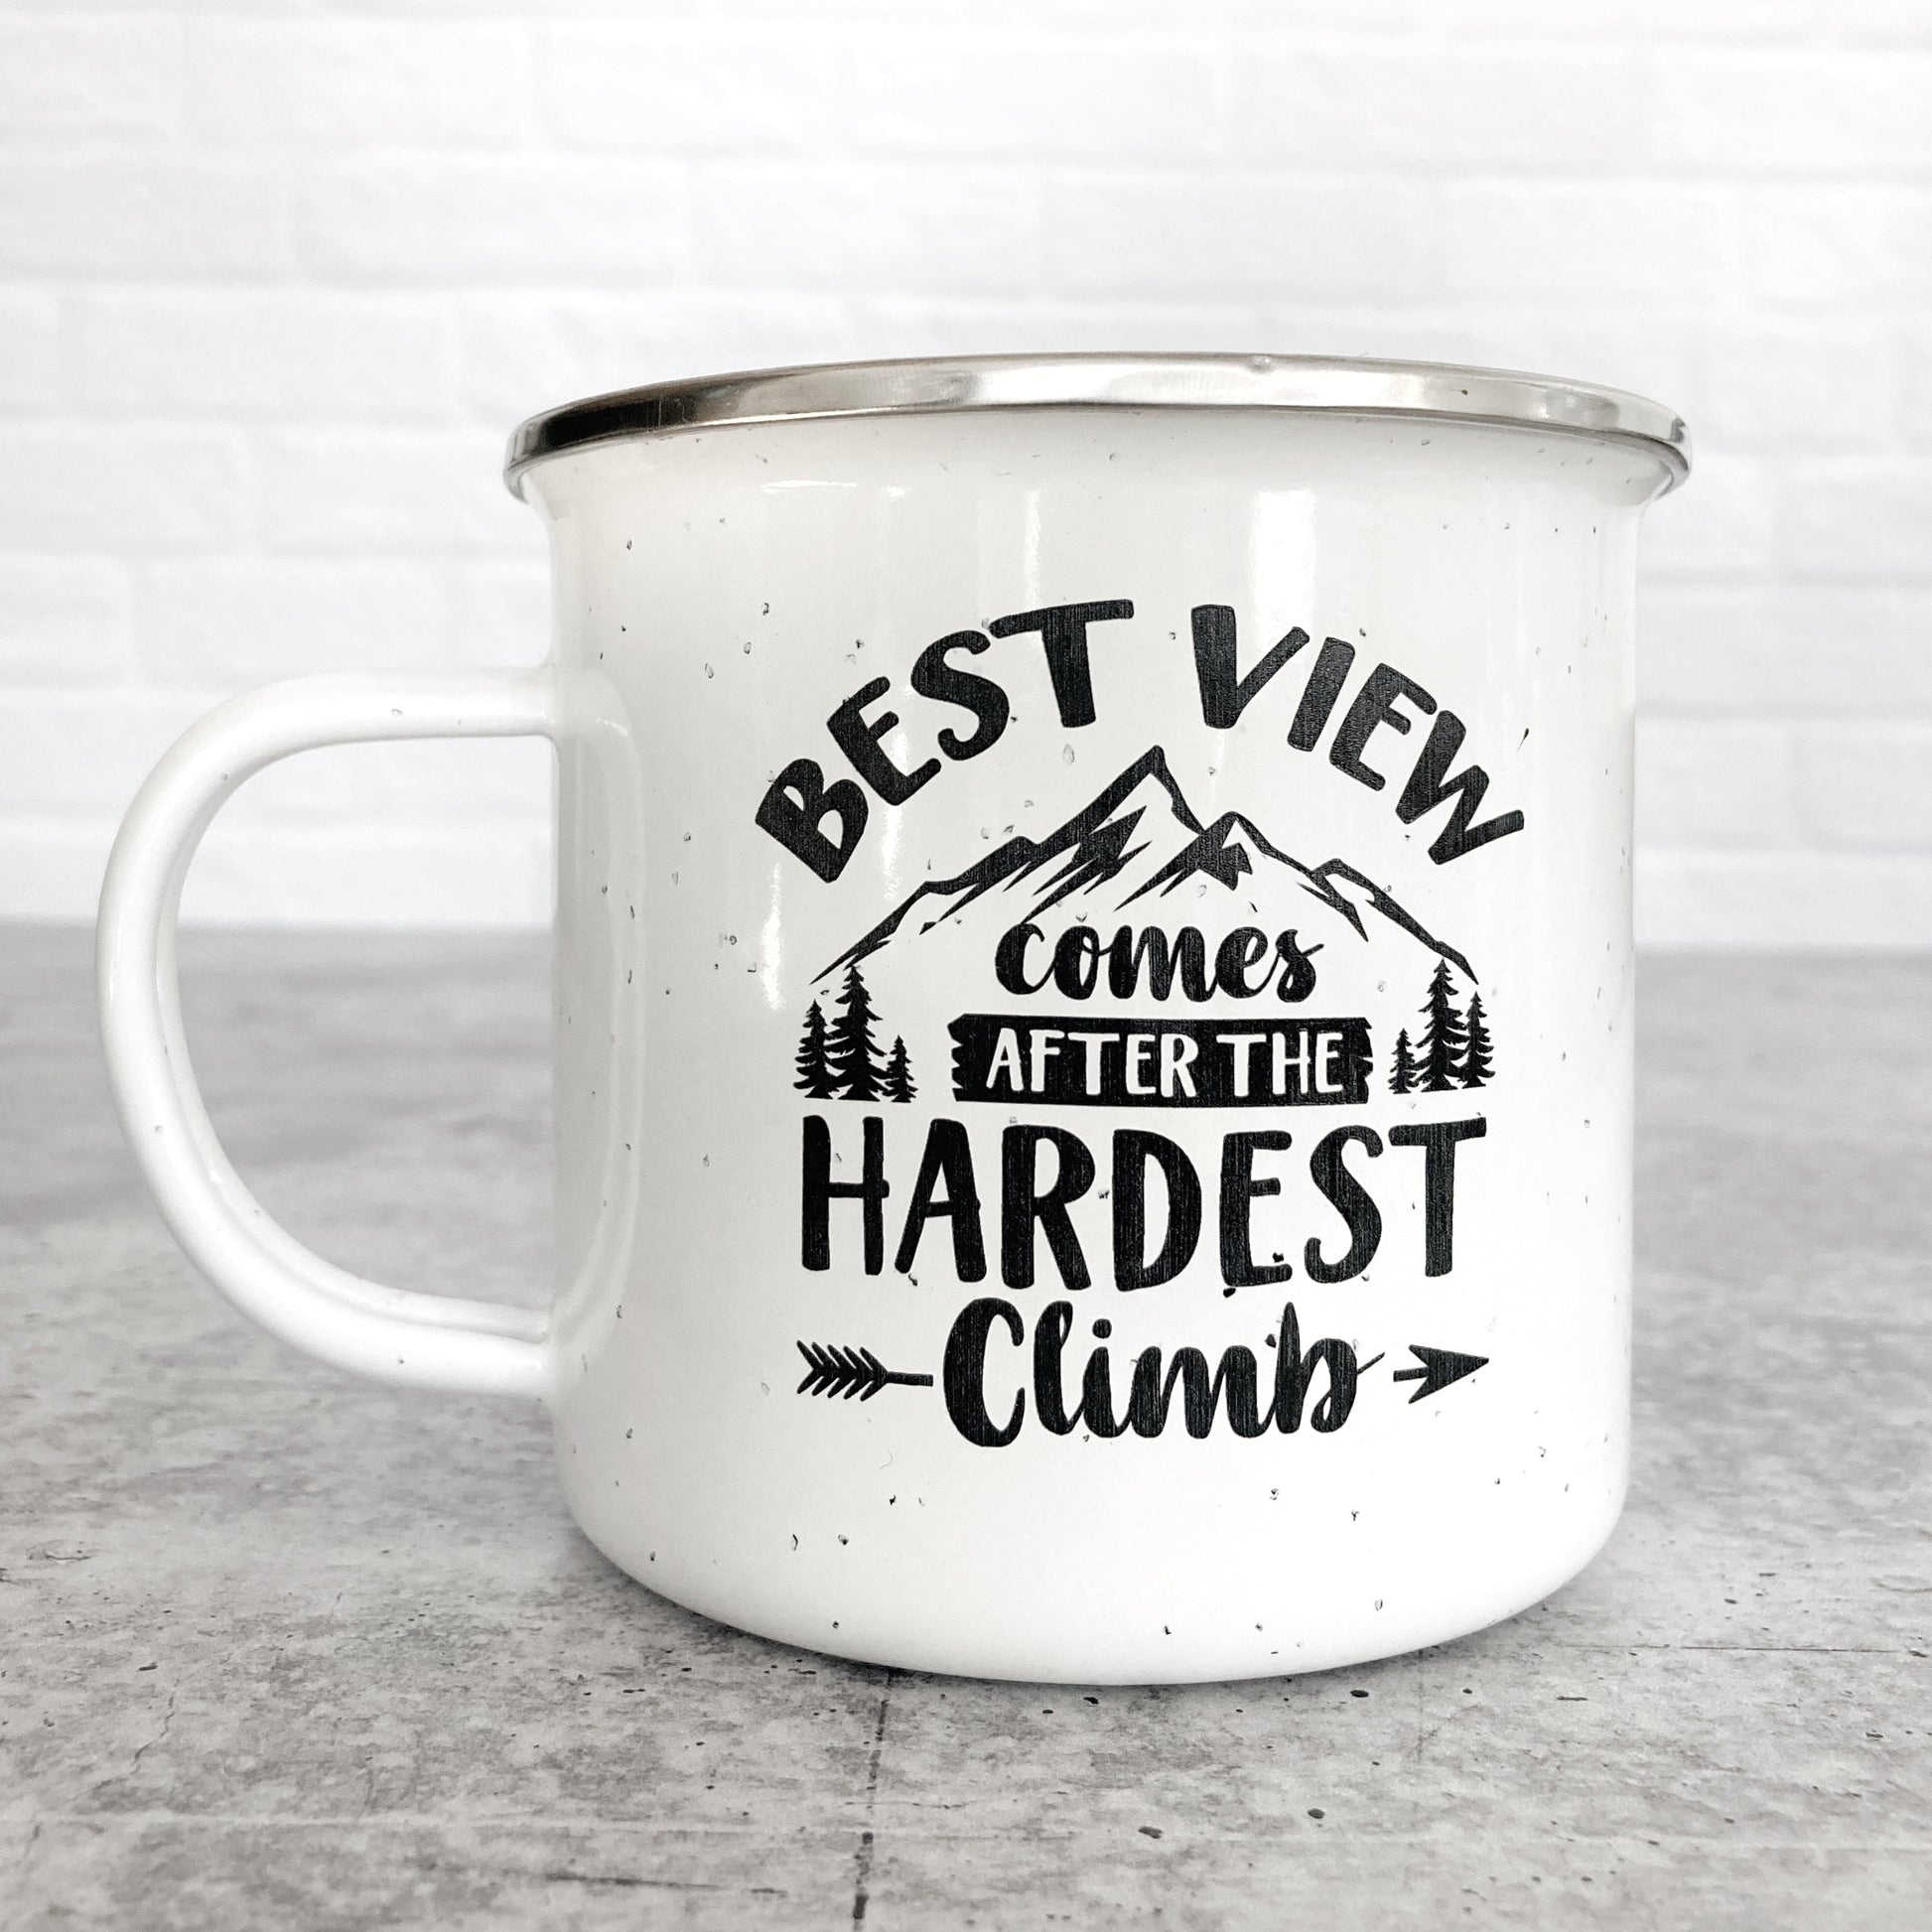 Best View Comes After the Hardest Climb on a White Enamel Mug